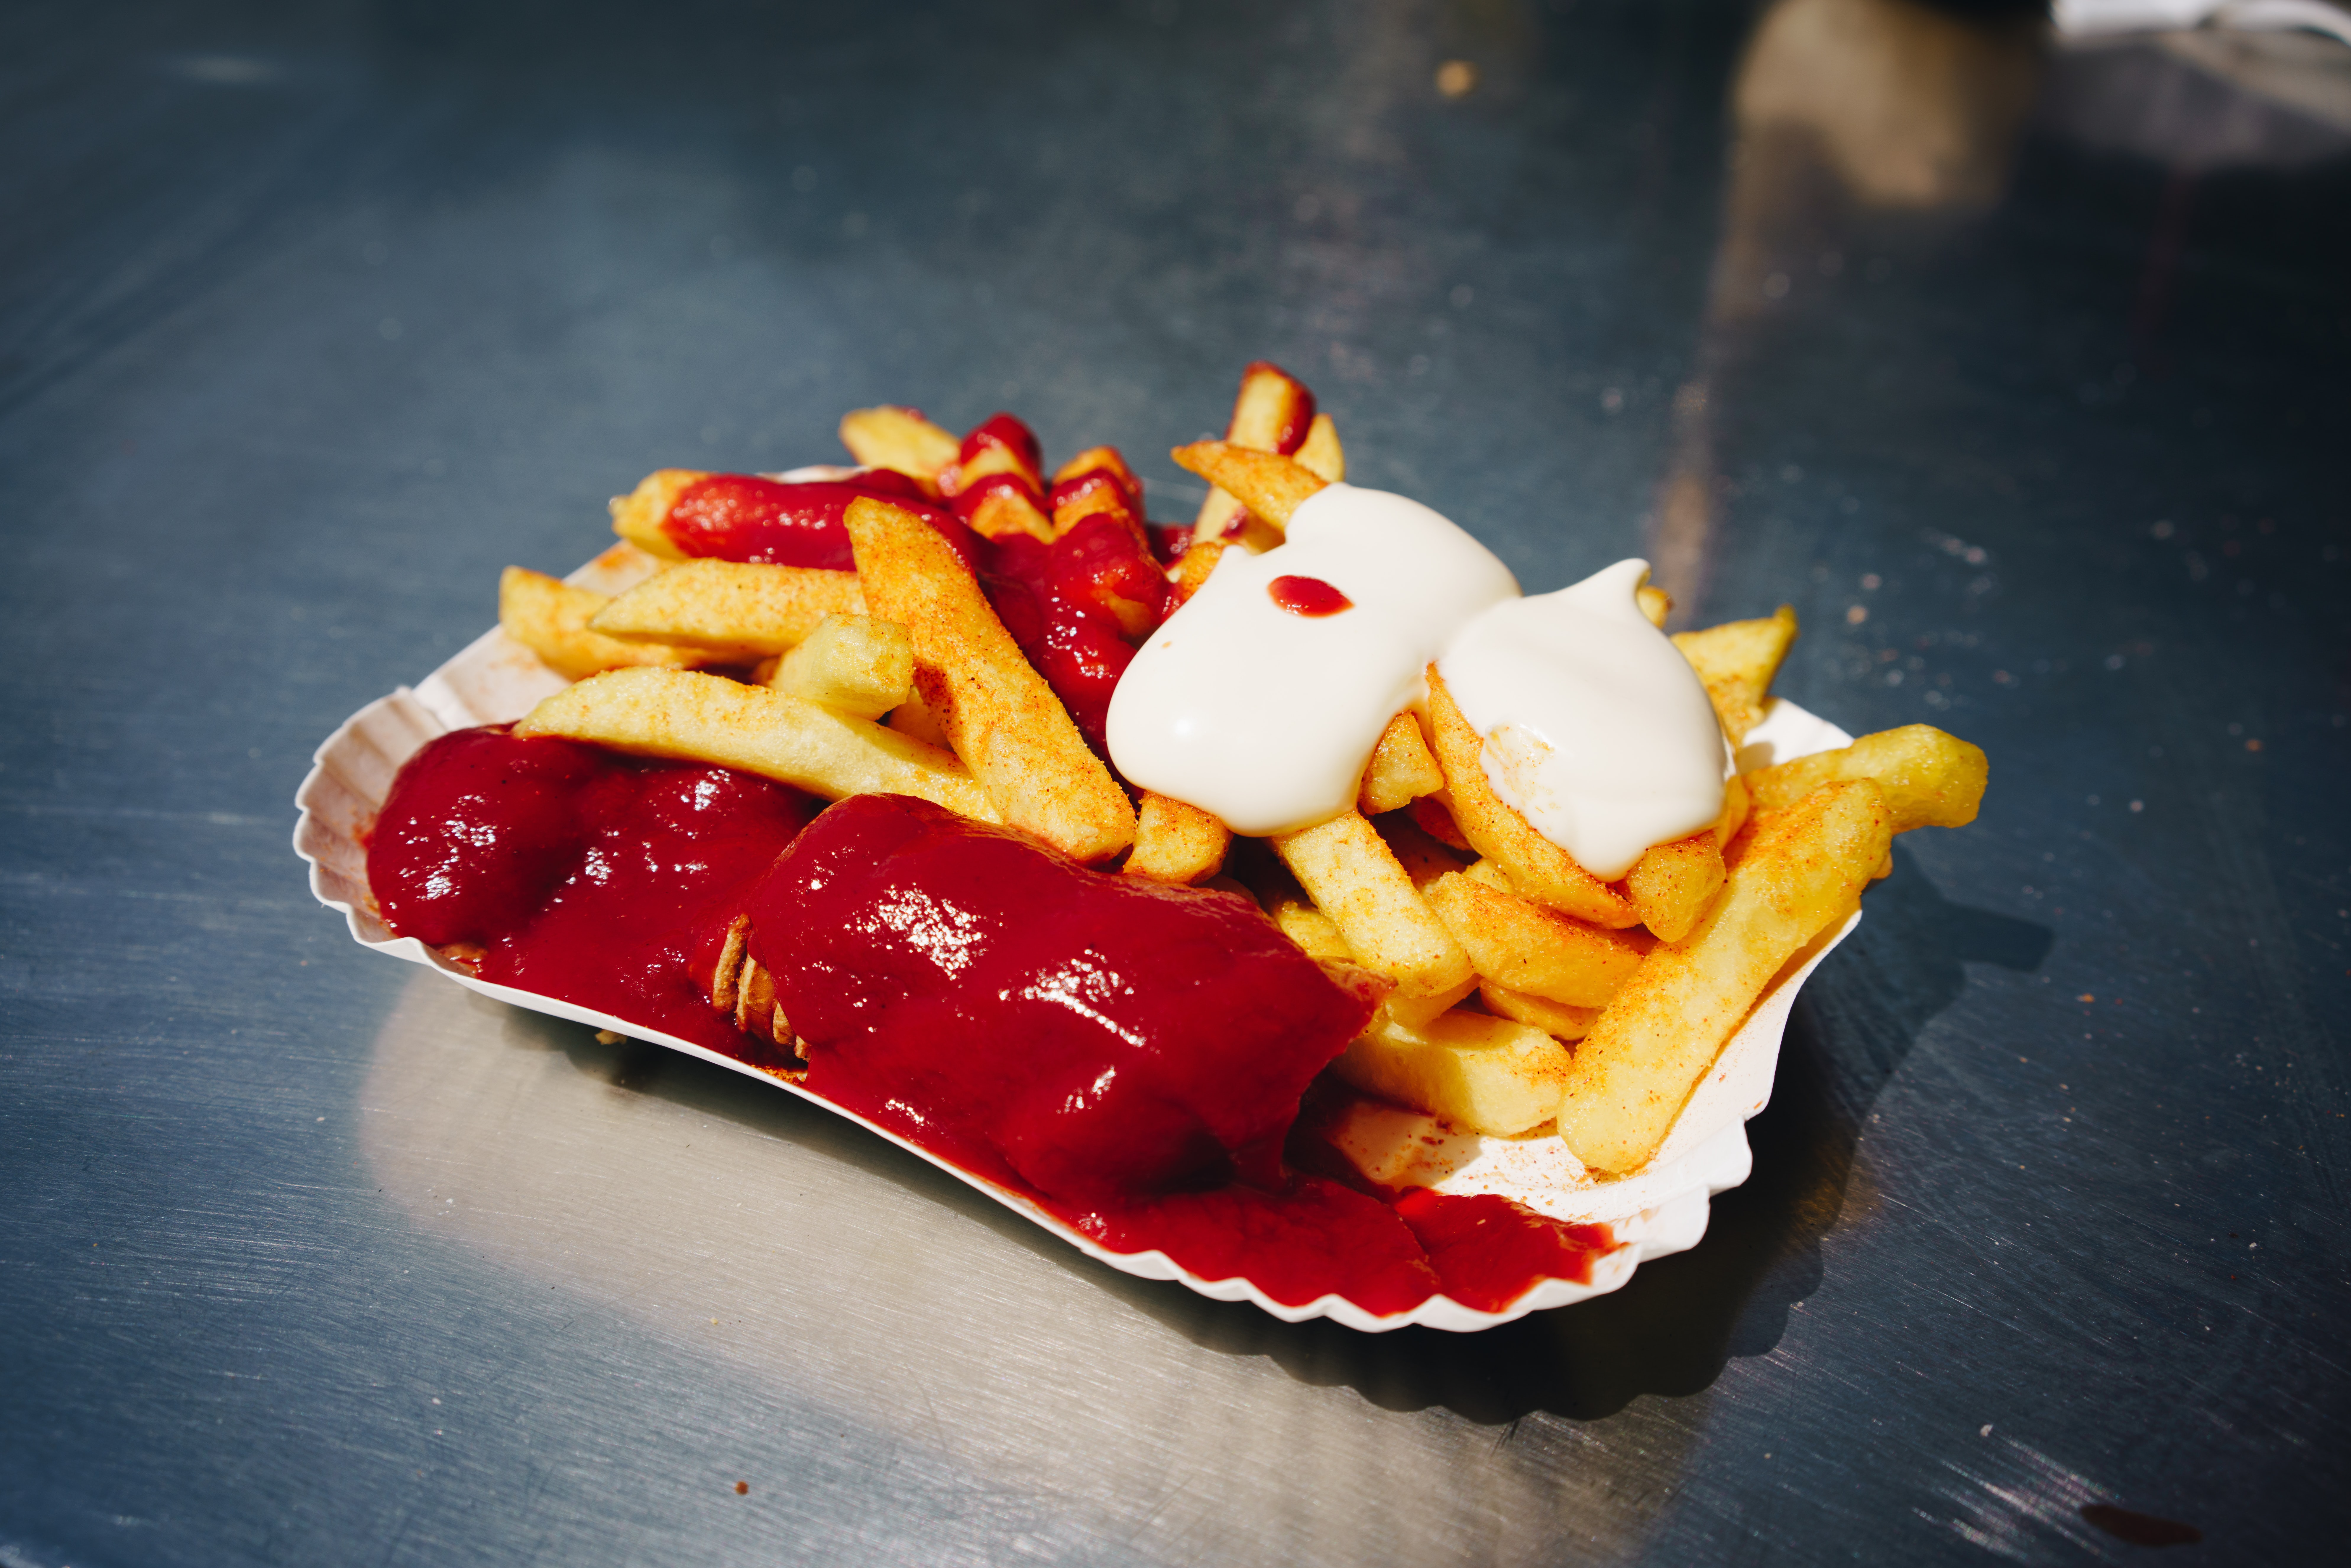 Currywurst and french fries